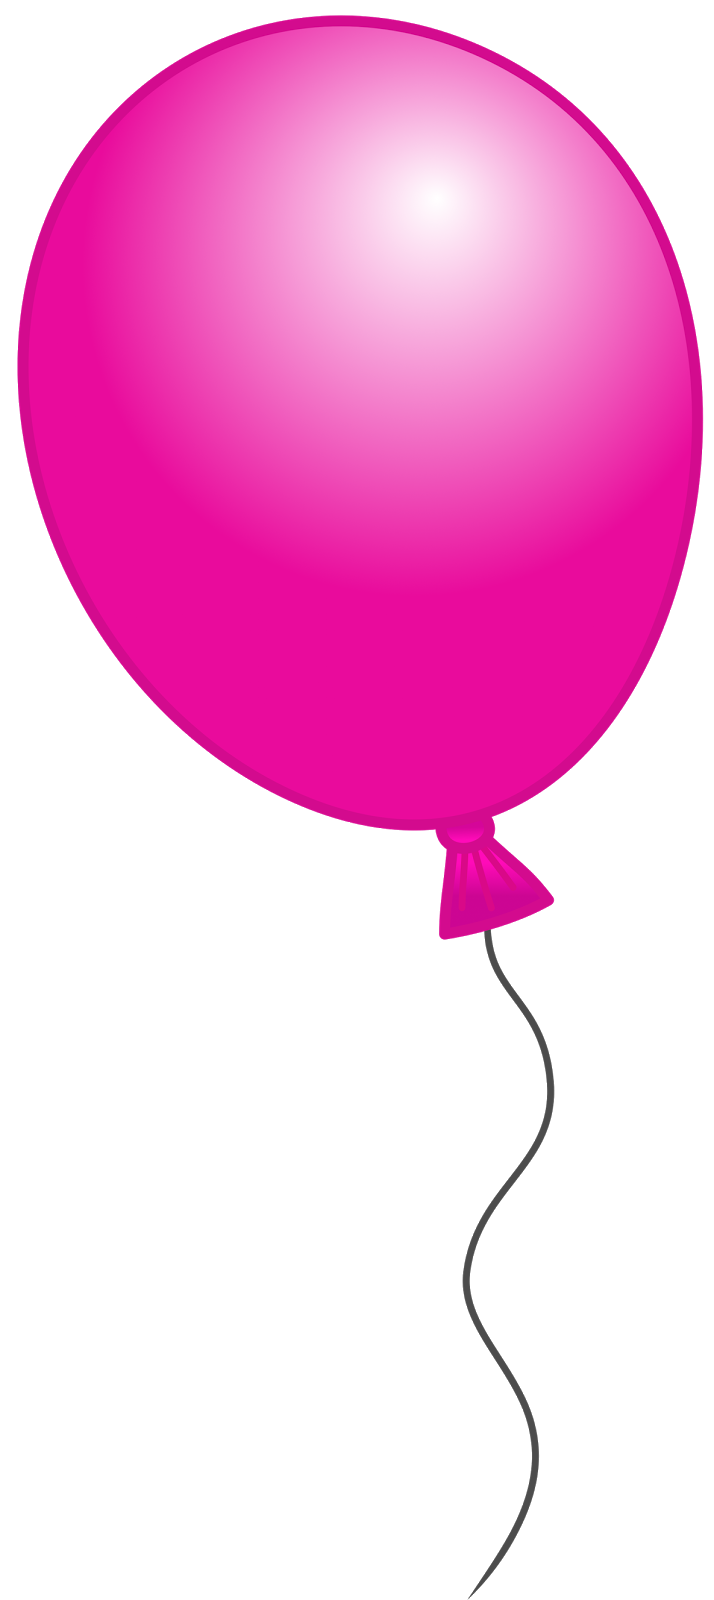 Pink birthday balloons clipart no background